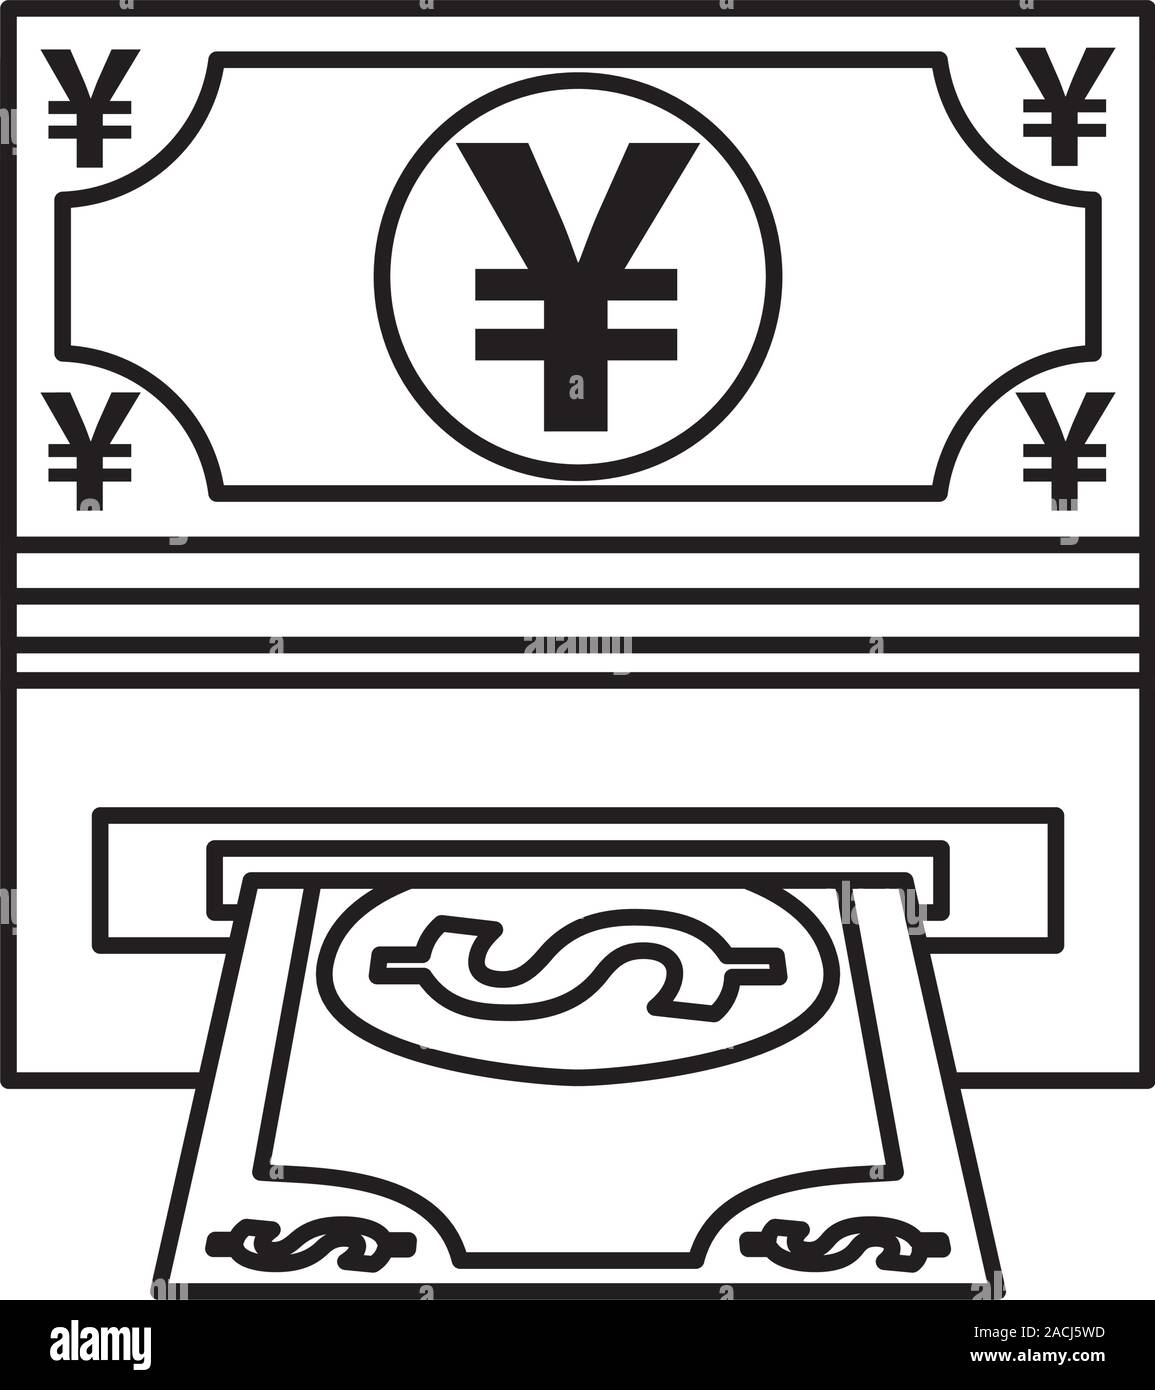 yens bills money with atm hole Stock Vector